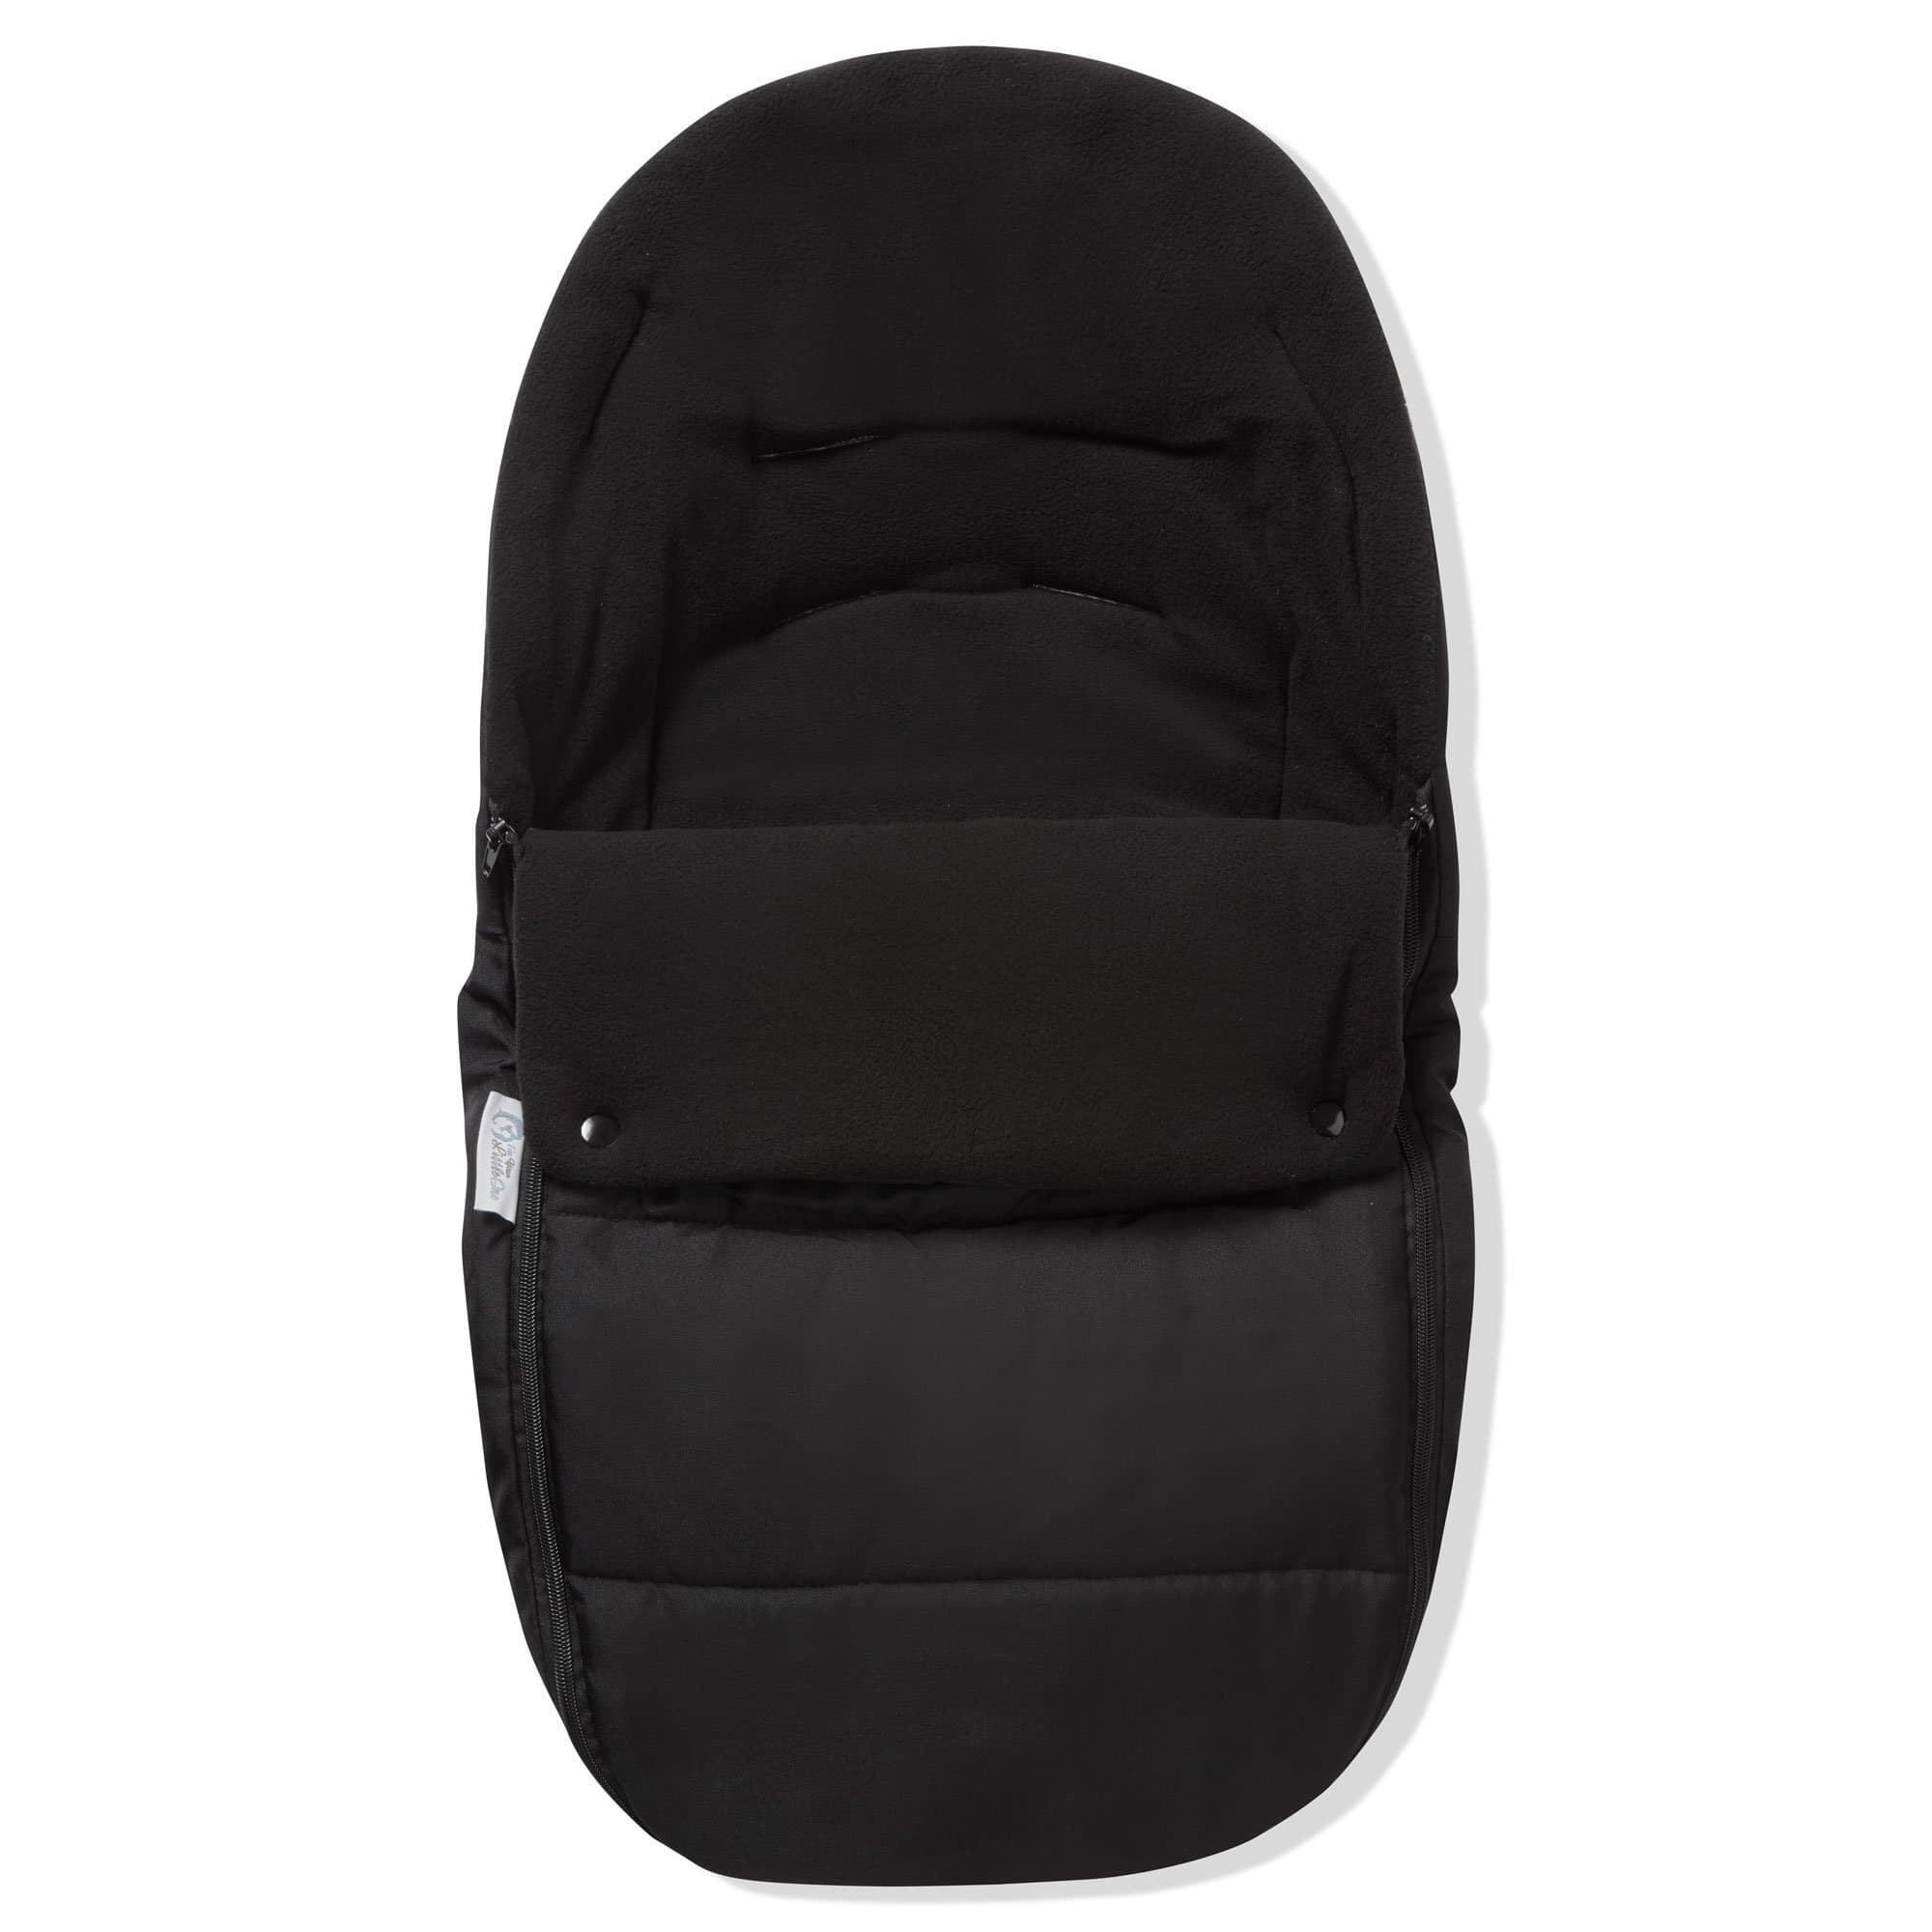 Premium Car Seat Footmuff / Cosy Toes Compatible with Babylo - Black Jack / Fits All Models | For Your Little One